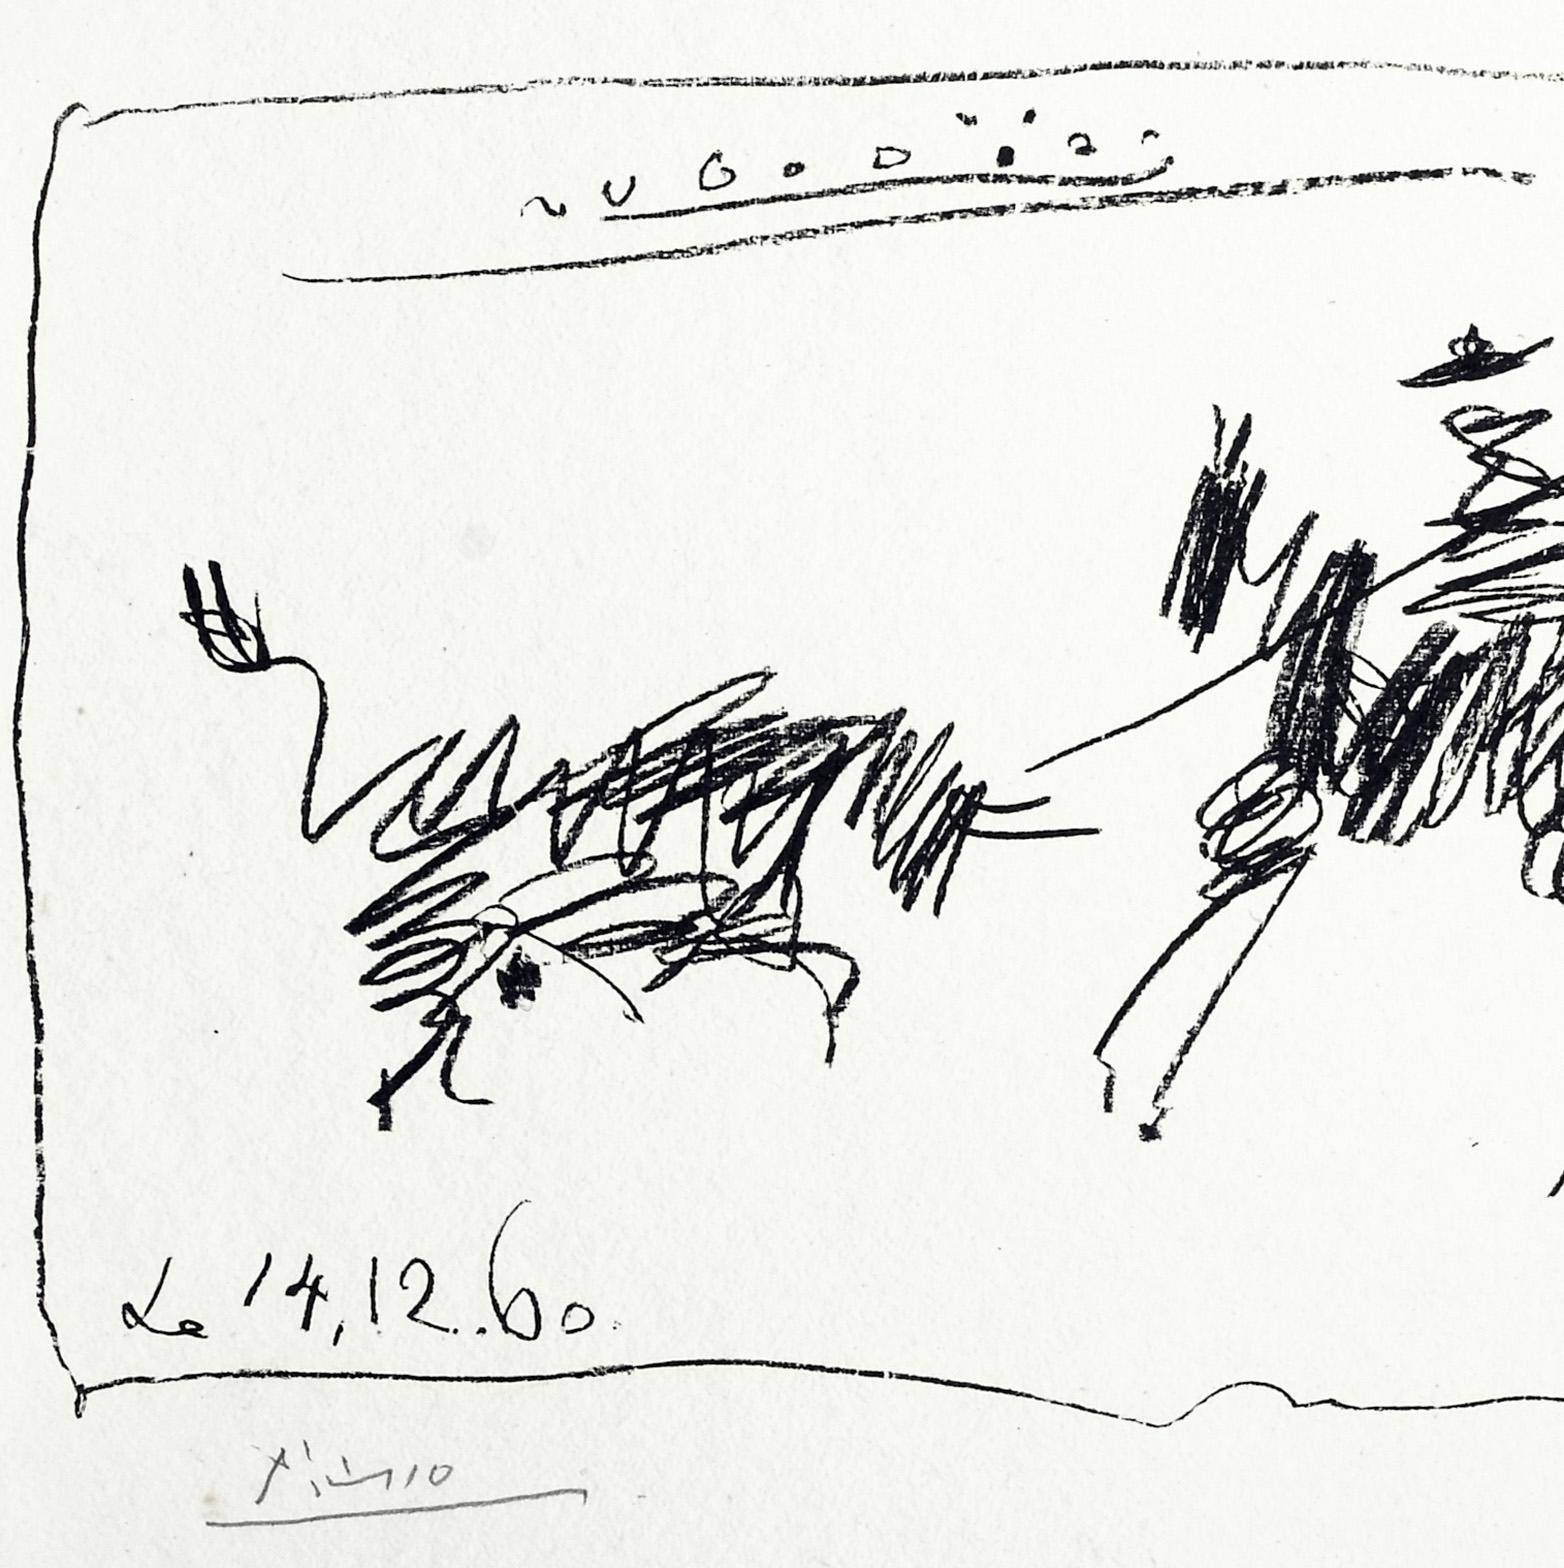 Toros (La Pique), 1960, Pablo Picasso, Lithograph, Bull fighter, Spanish, Signed - Post-War Print by (after) Pablo Picasso